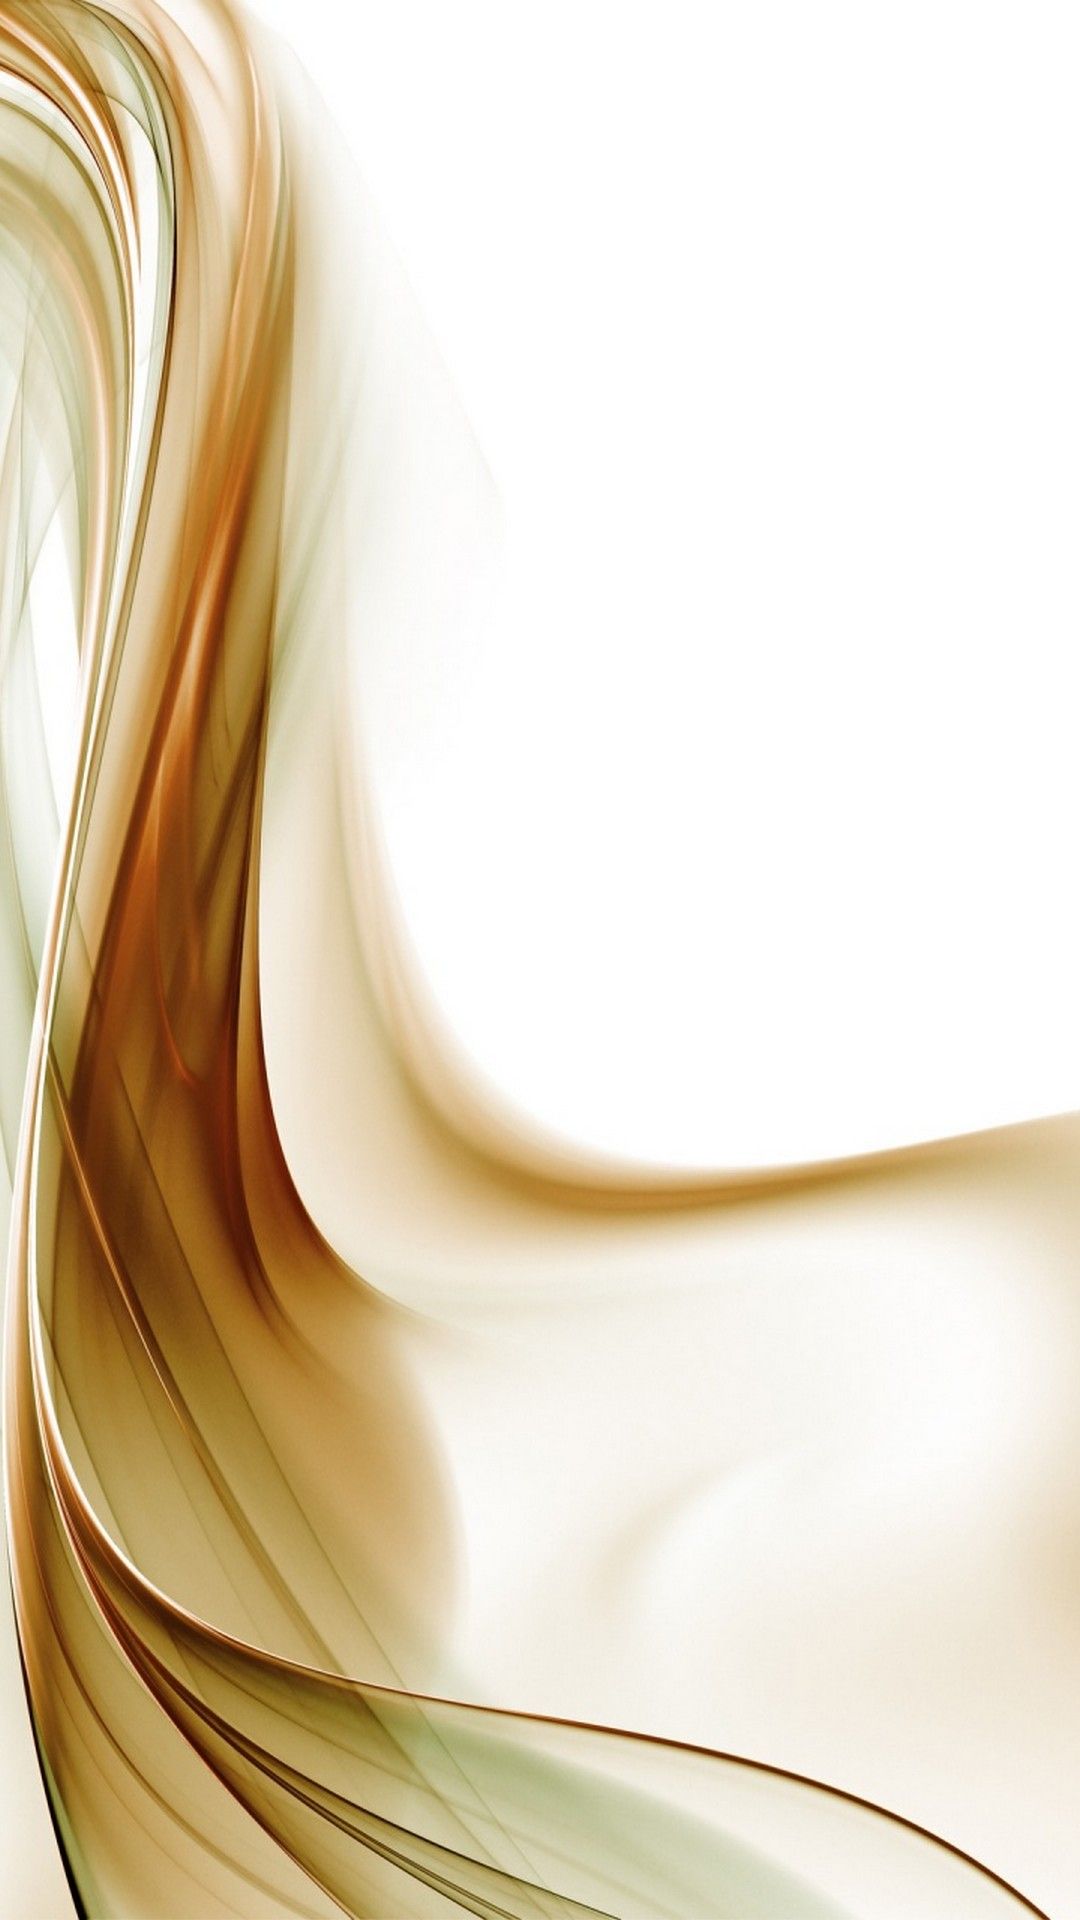 White and Gold iPhone Wallpaper Free White and Gold iPhone Background